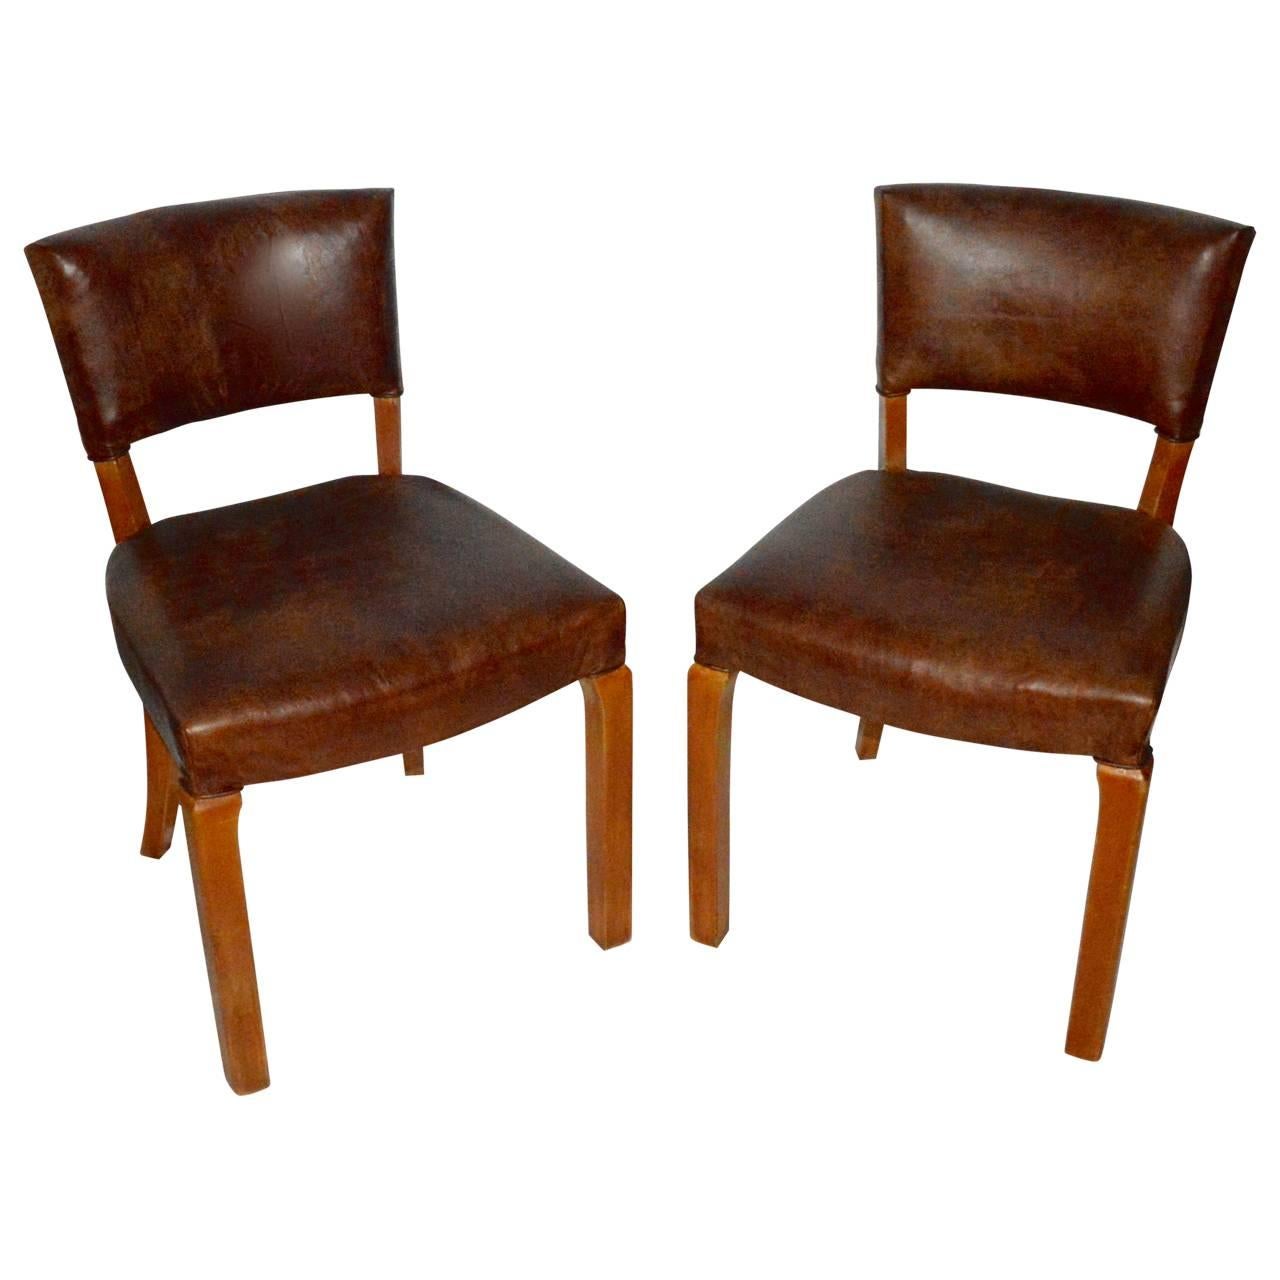 European 20th Century Art Deco Leather Dining Chairs